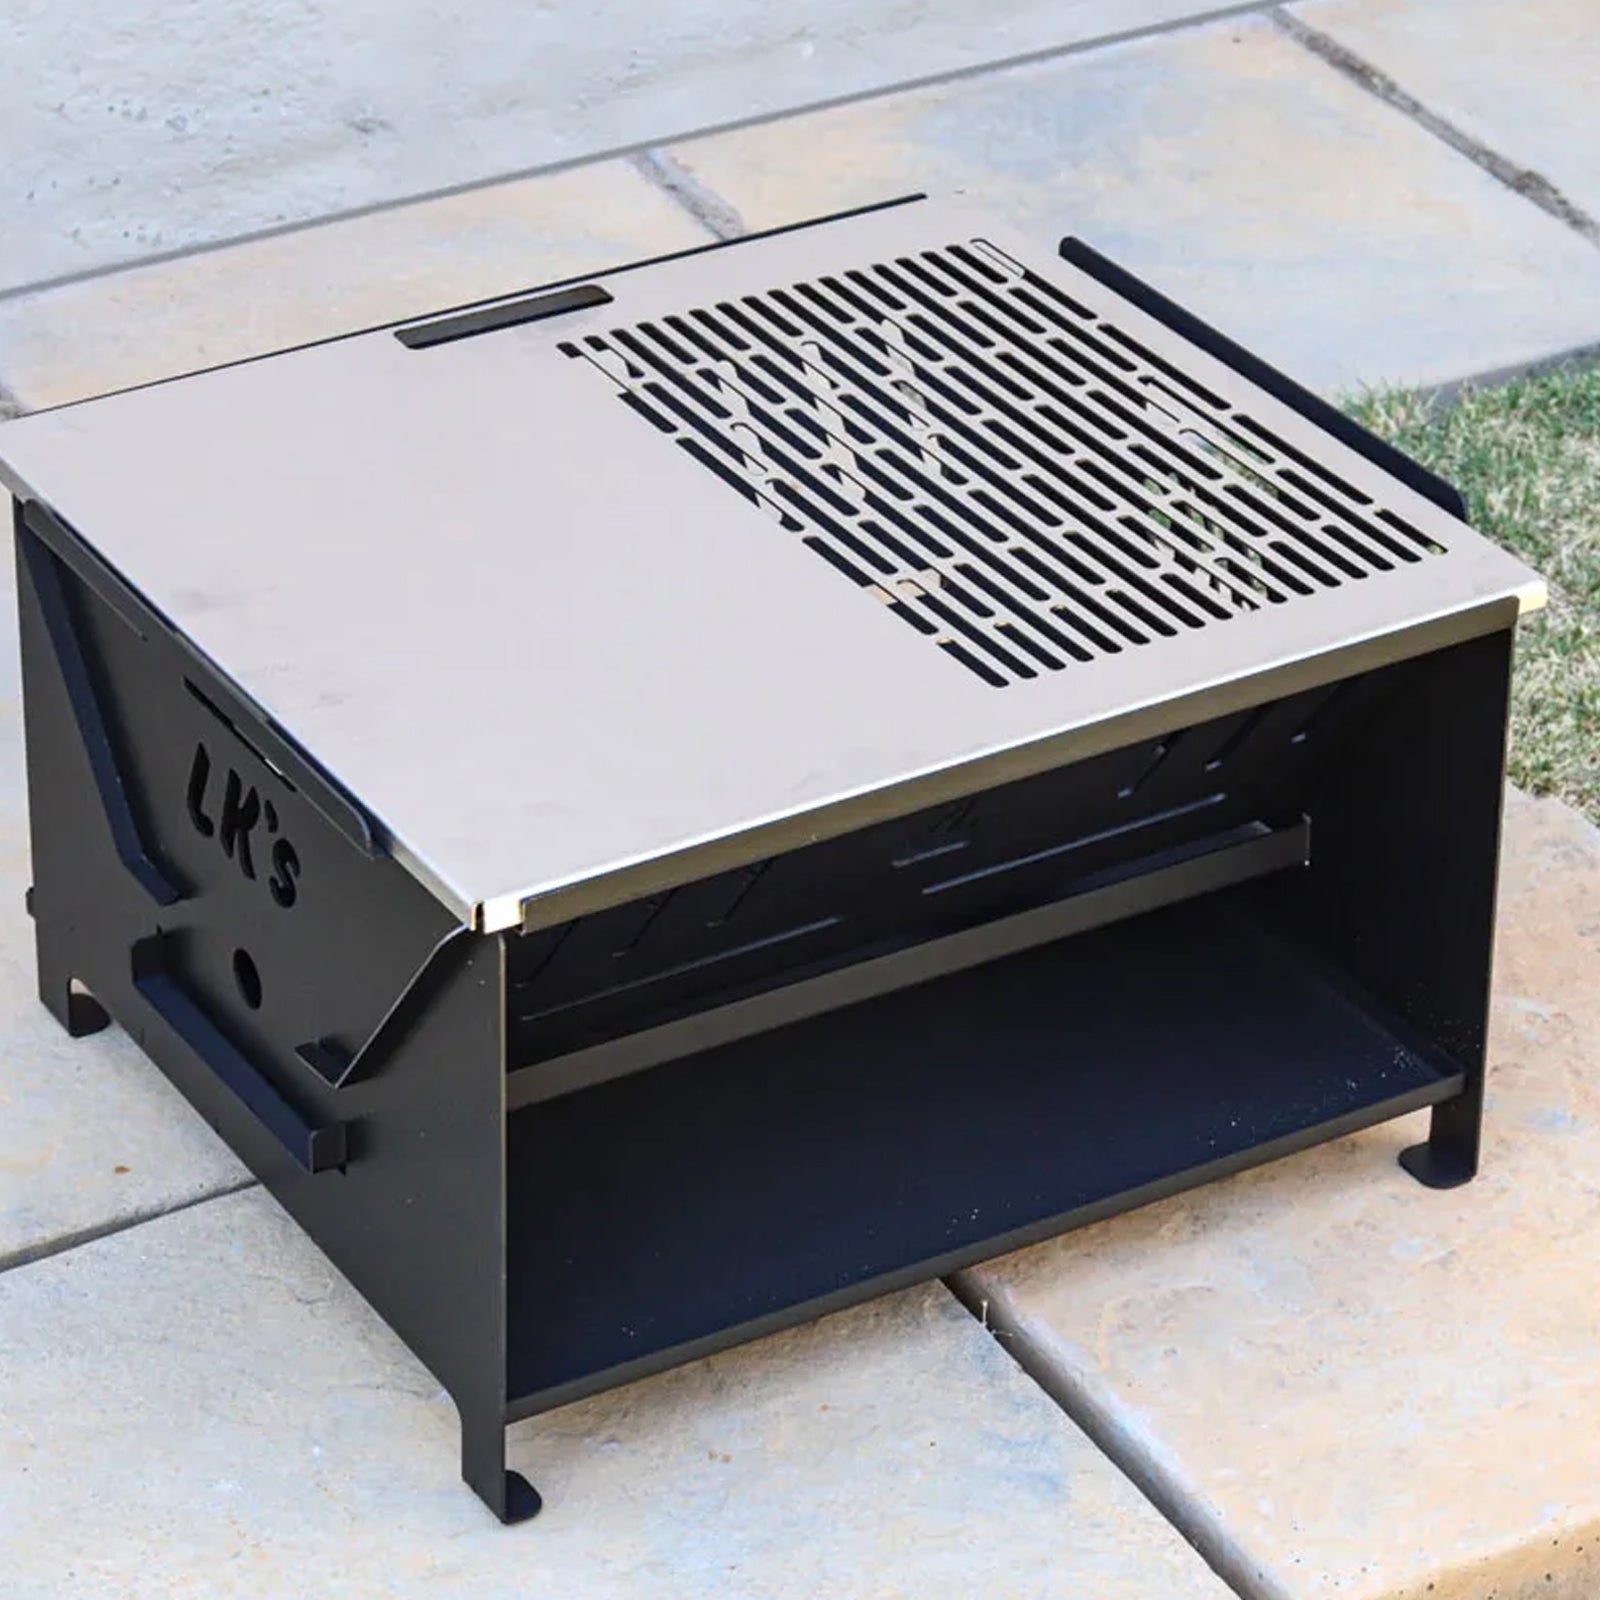 Braai Firepit for Outdoor Cooking